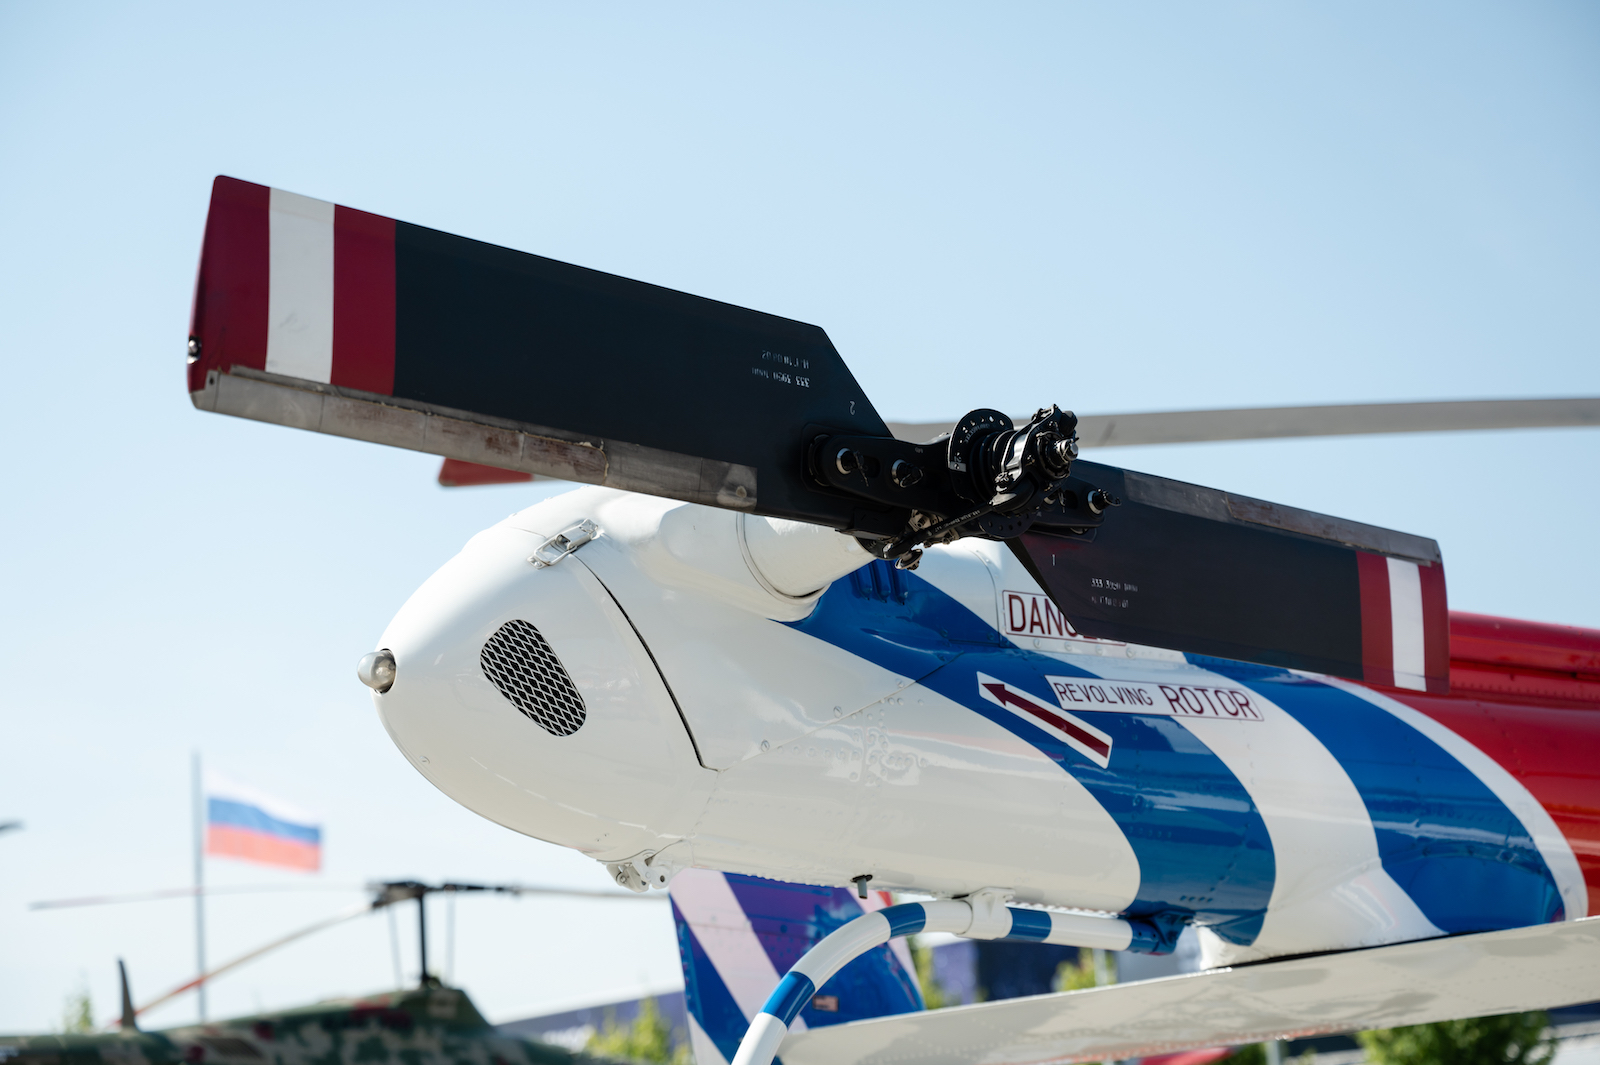 Rostec to Equip Ansat Helicopters with New Generation Blades